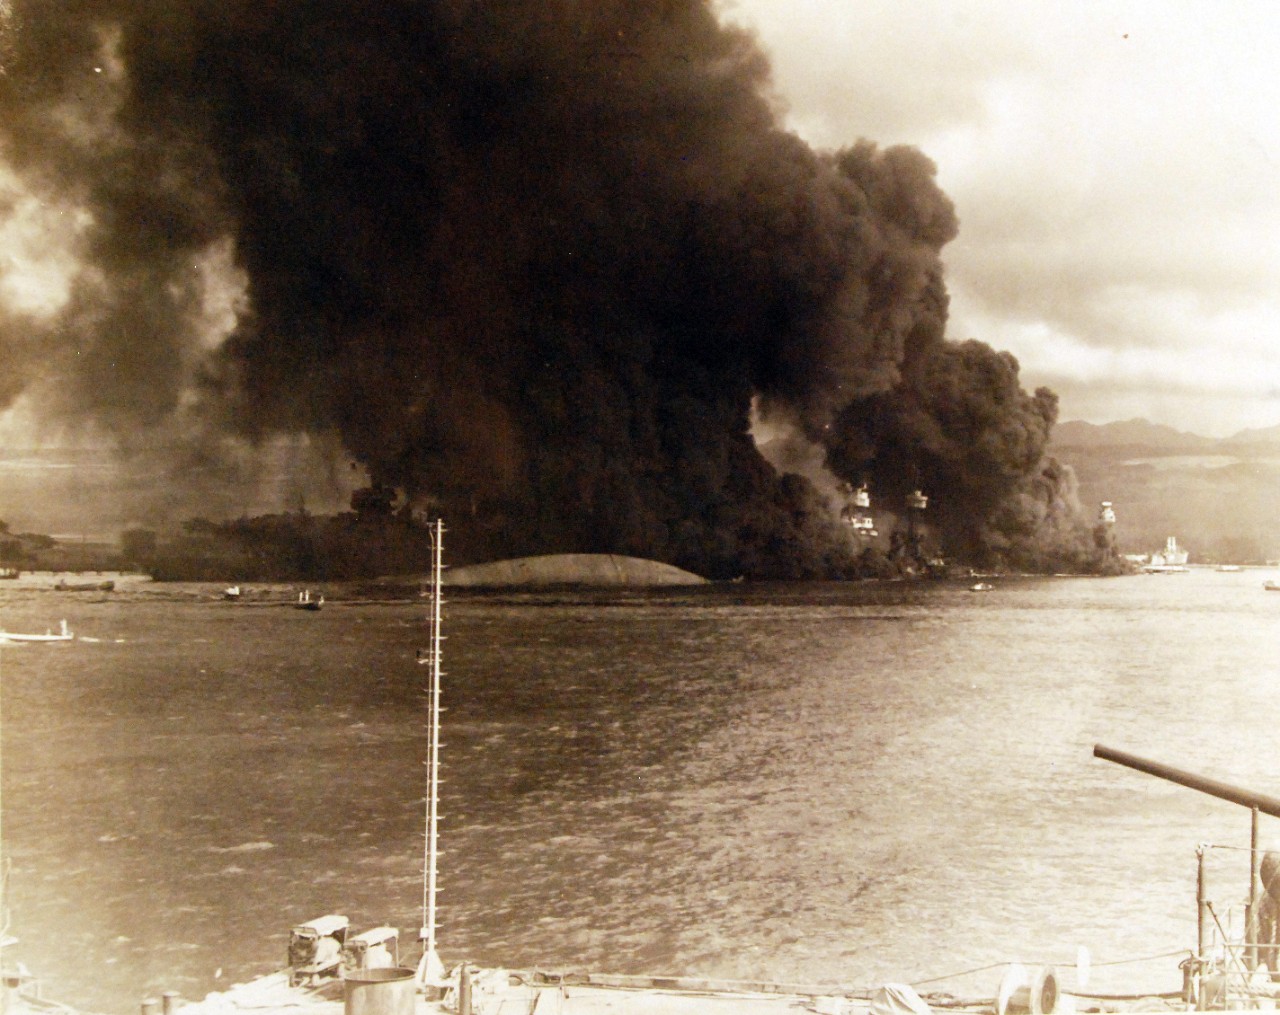 <p>80-G-32450: Japanese Attack on Pearl Harbor, December 7, 1941. View of “Battleship Row” during or immediately after the Japanese raid. The capsized USS Oklahoma (BB 37) is in the center, alongside USS Maryland (BB 46).</p>
